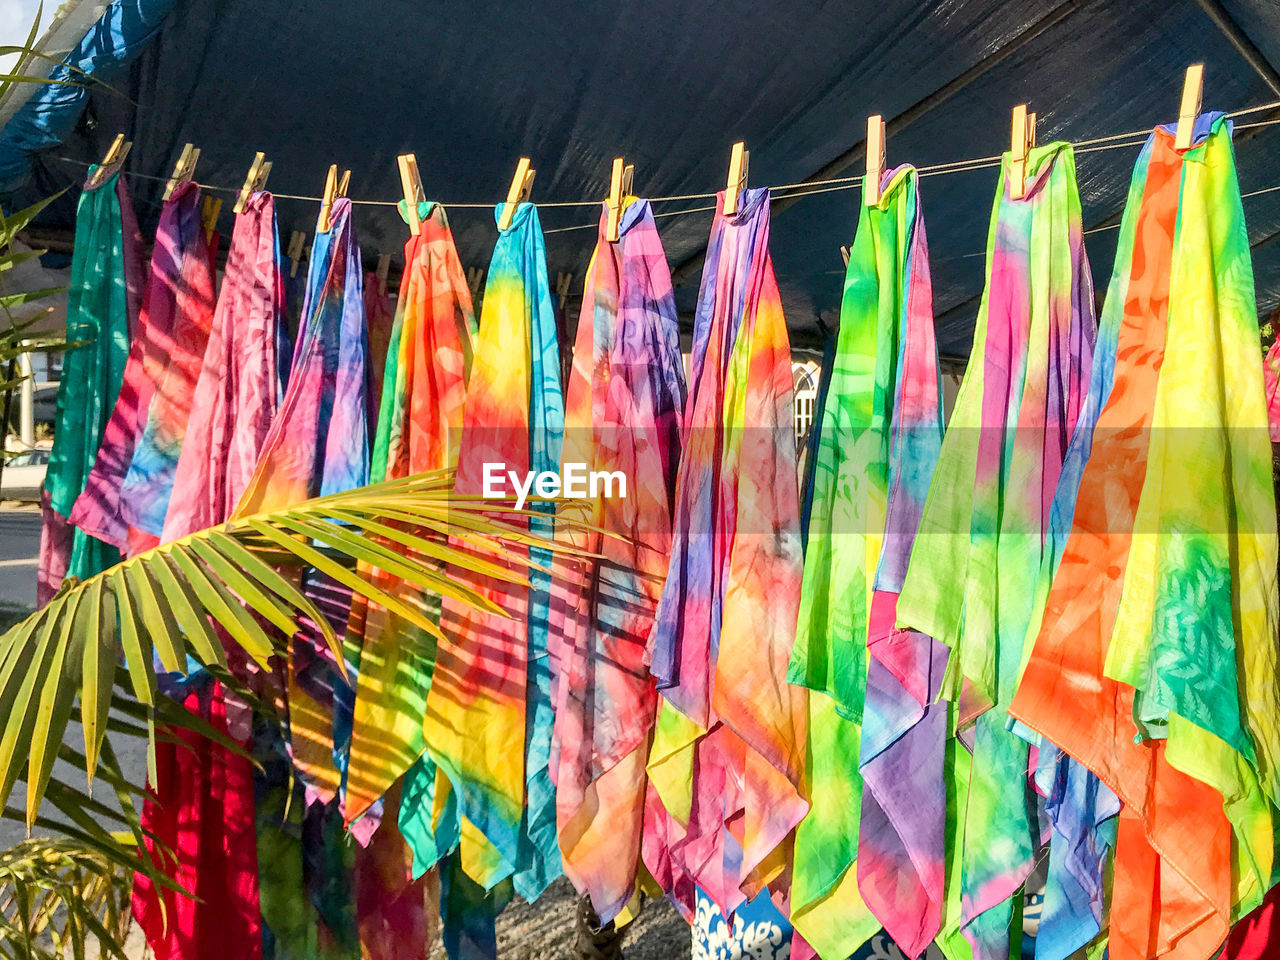 Colorful fabrics hanging for sale at market stall